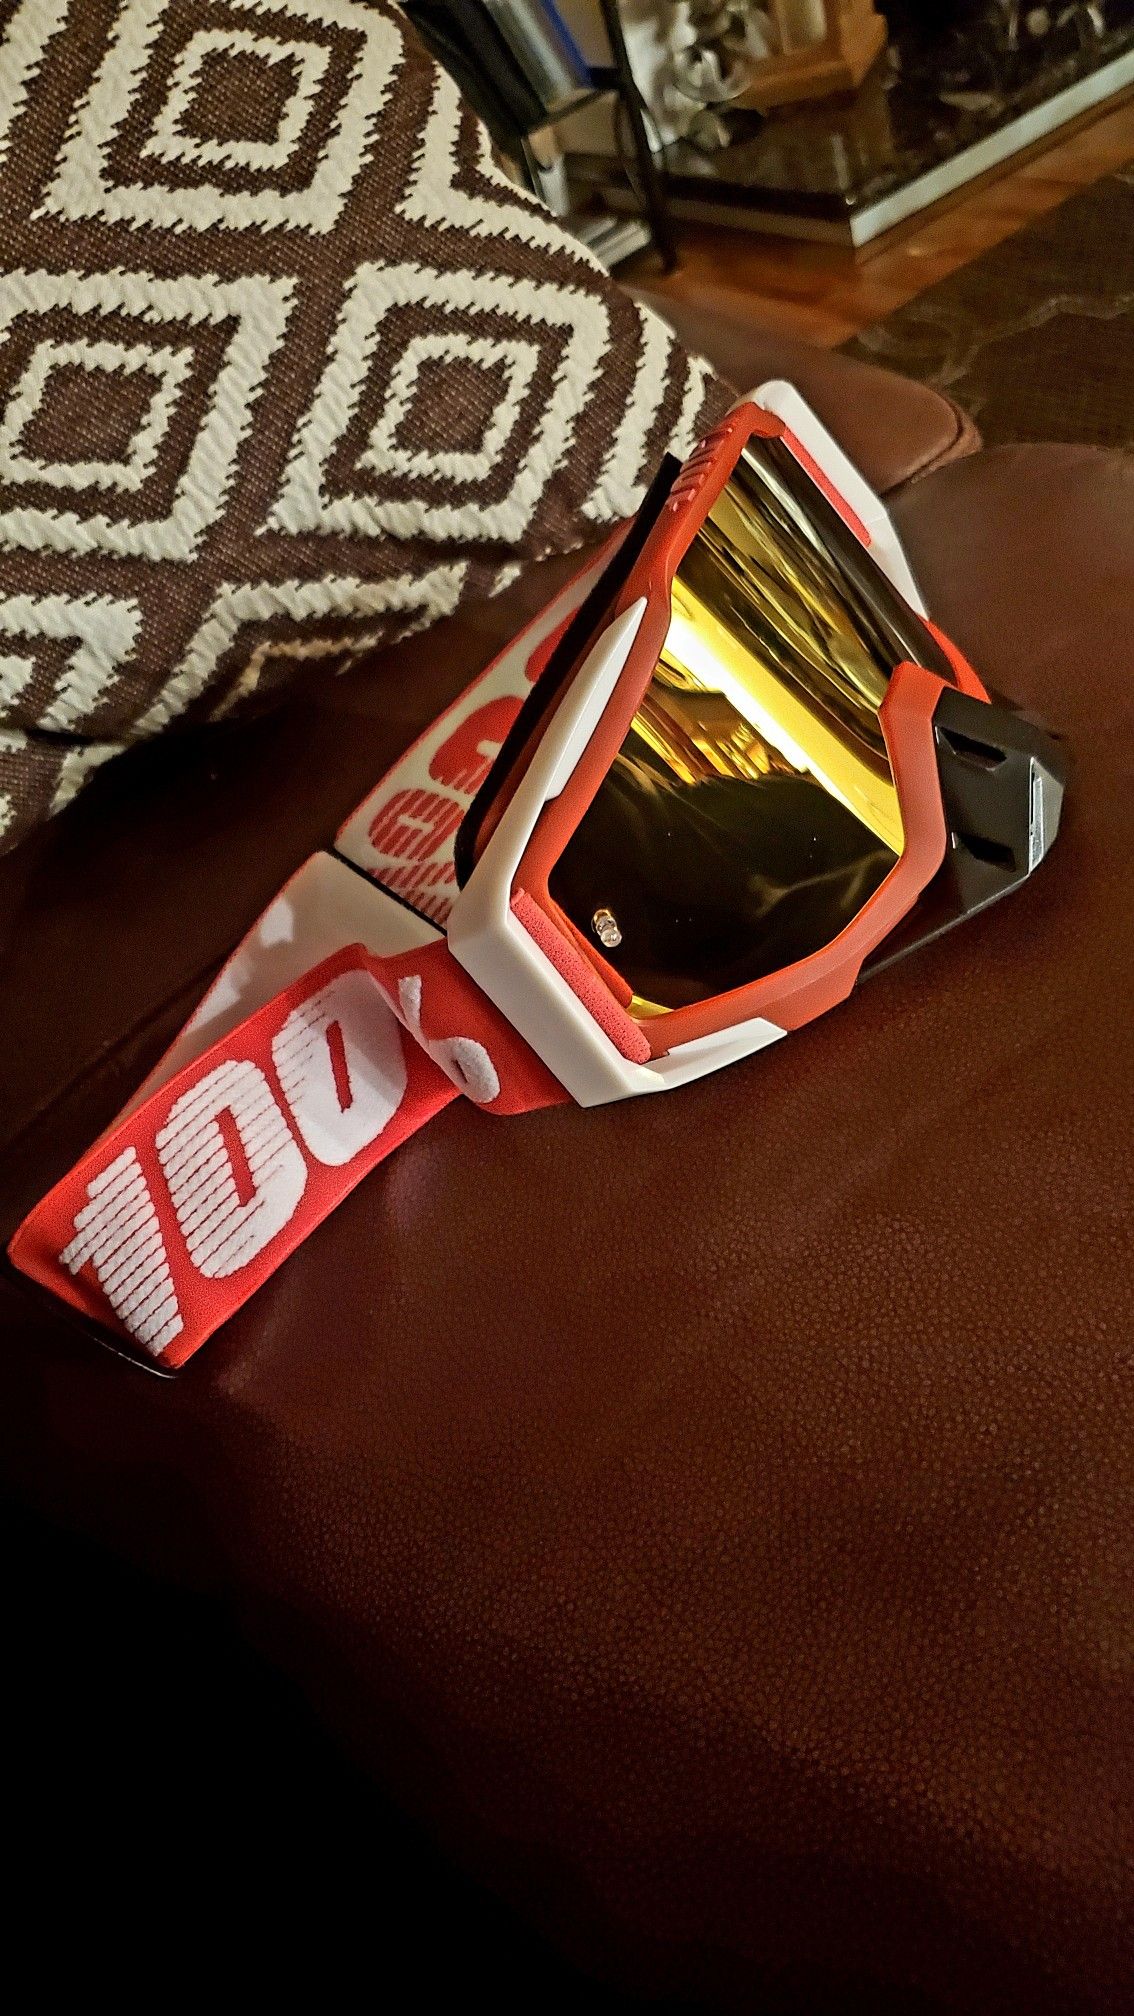 BRAND NEW!!: 100% Racing goggles